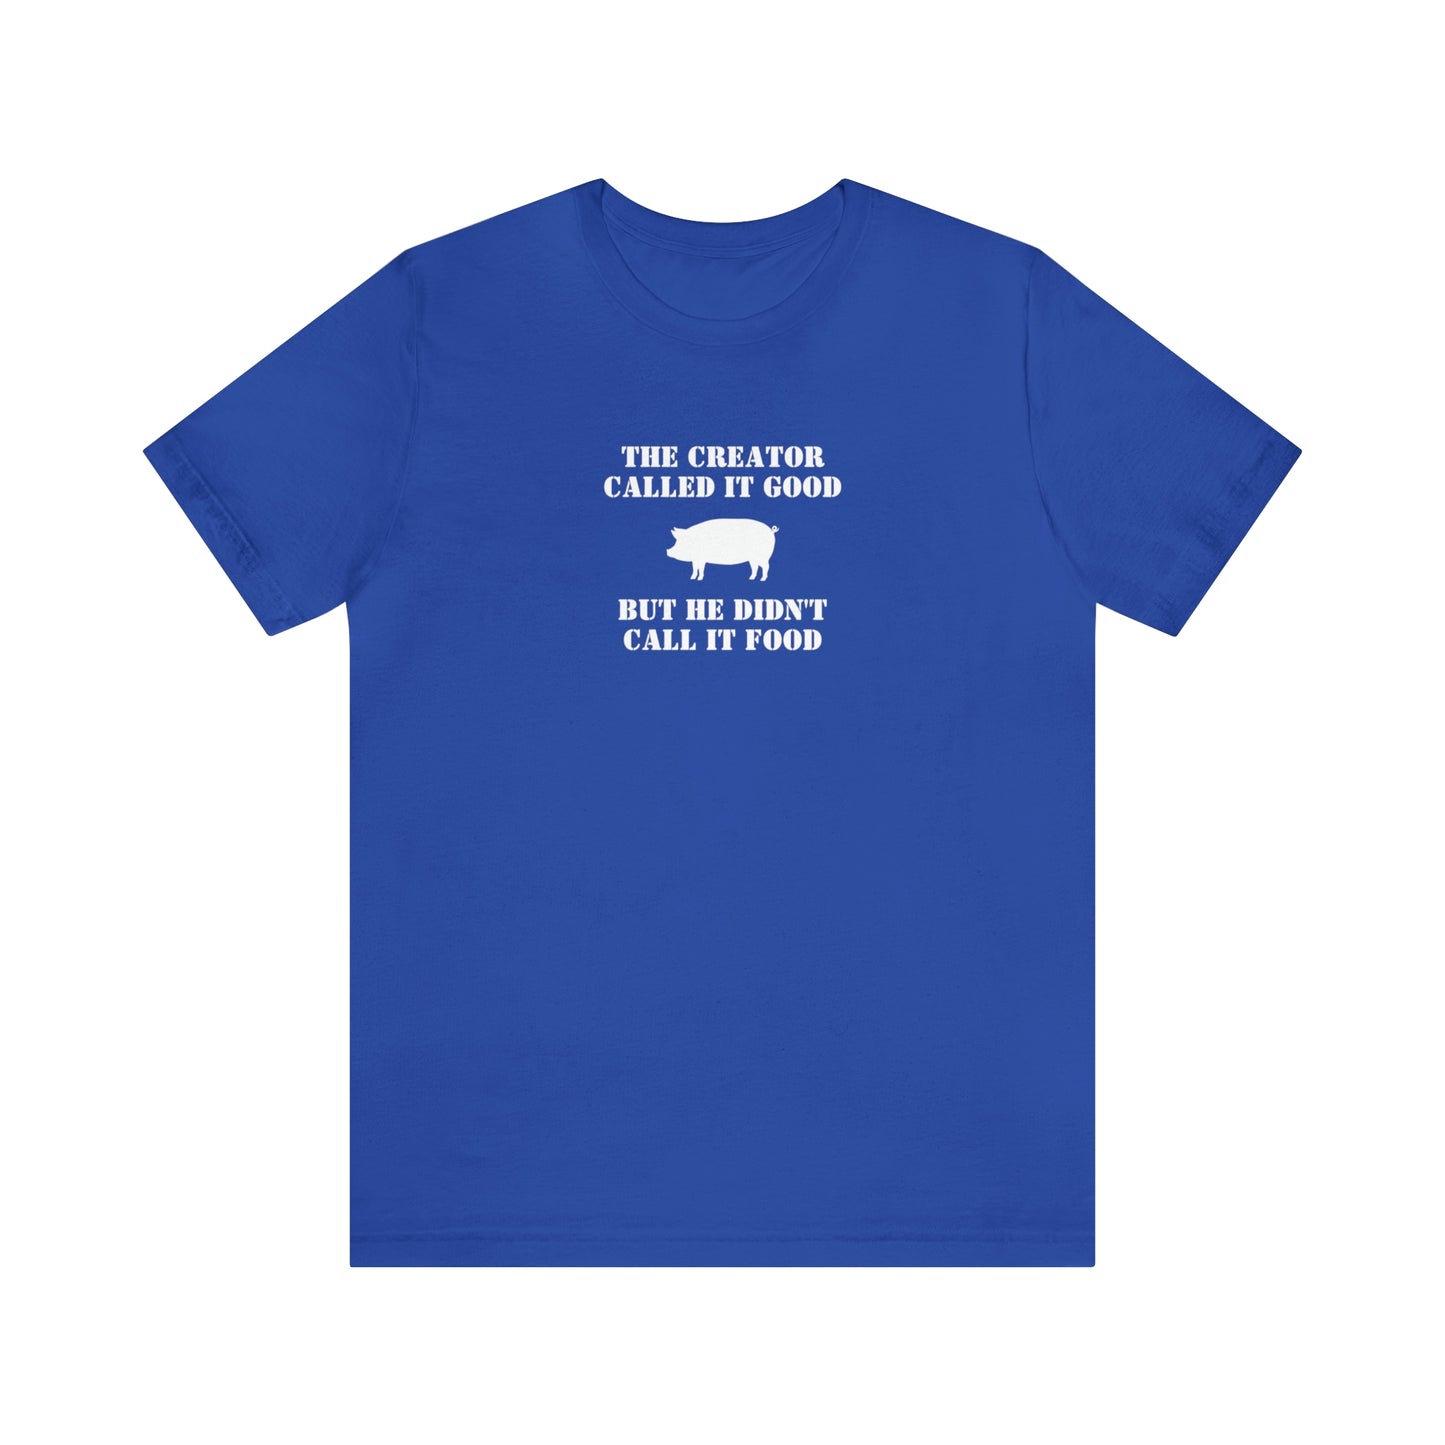 Pig is Not Food Shirt